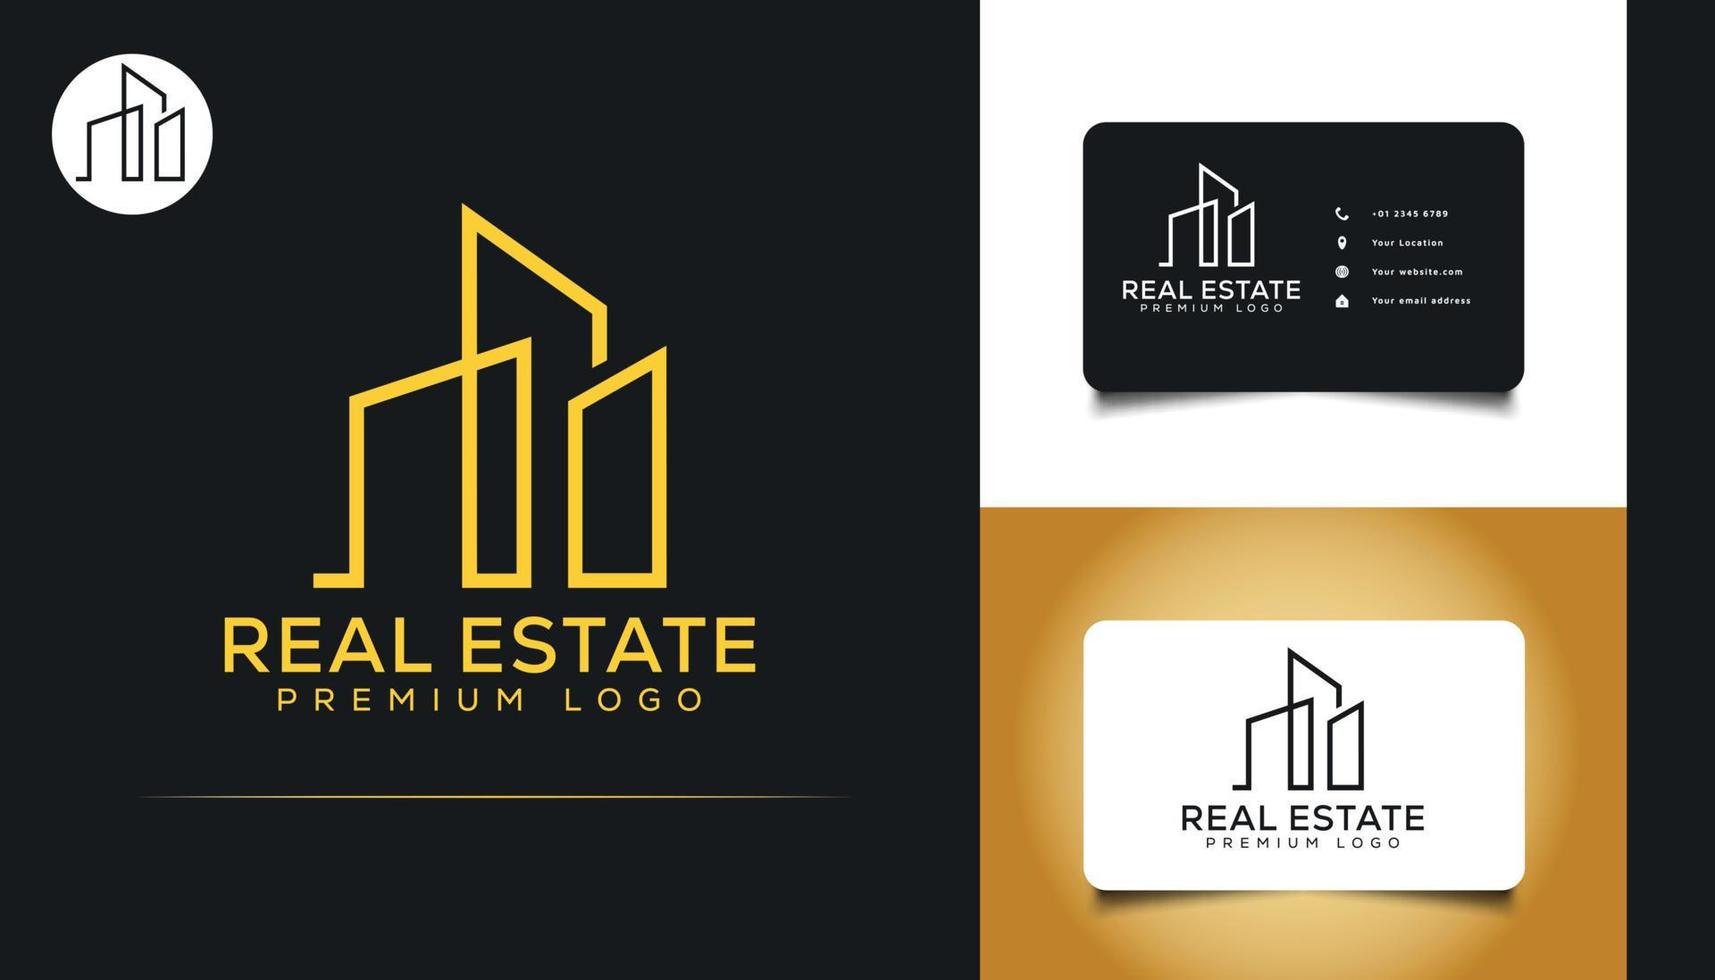 Abstract and Minimalist Real Estate Logo Design. Construction, Architecture or Building Logo vector